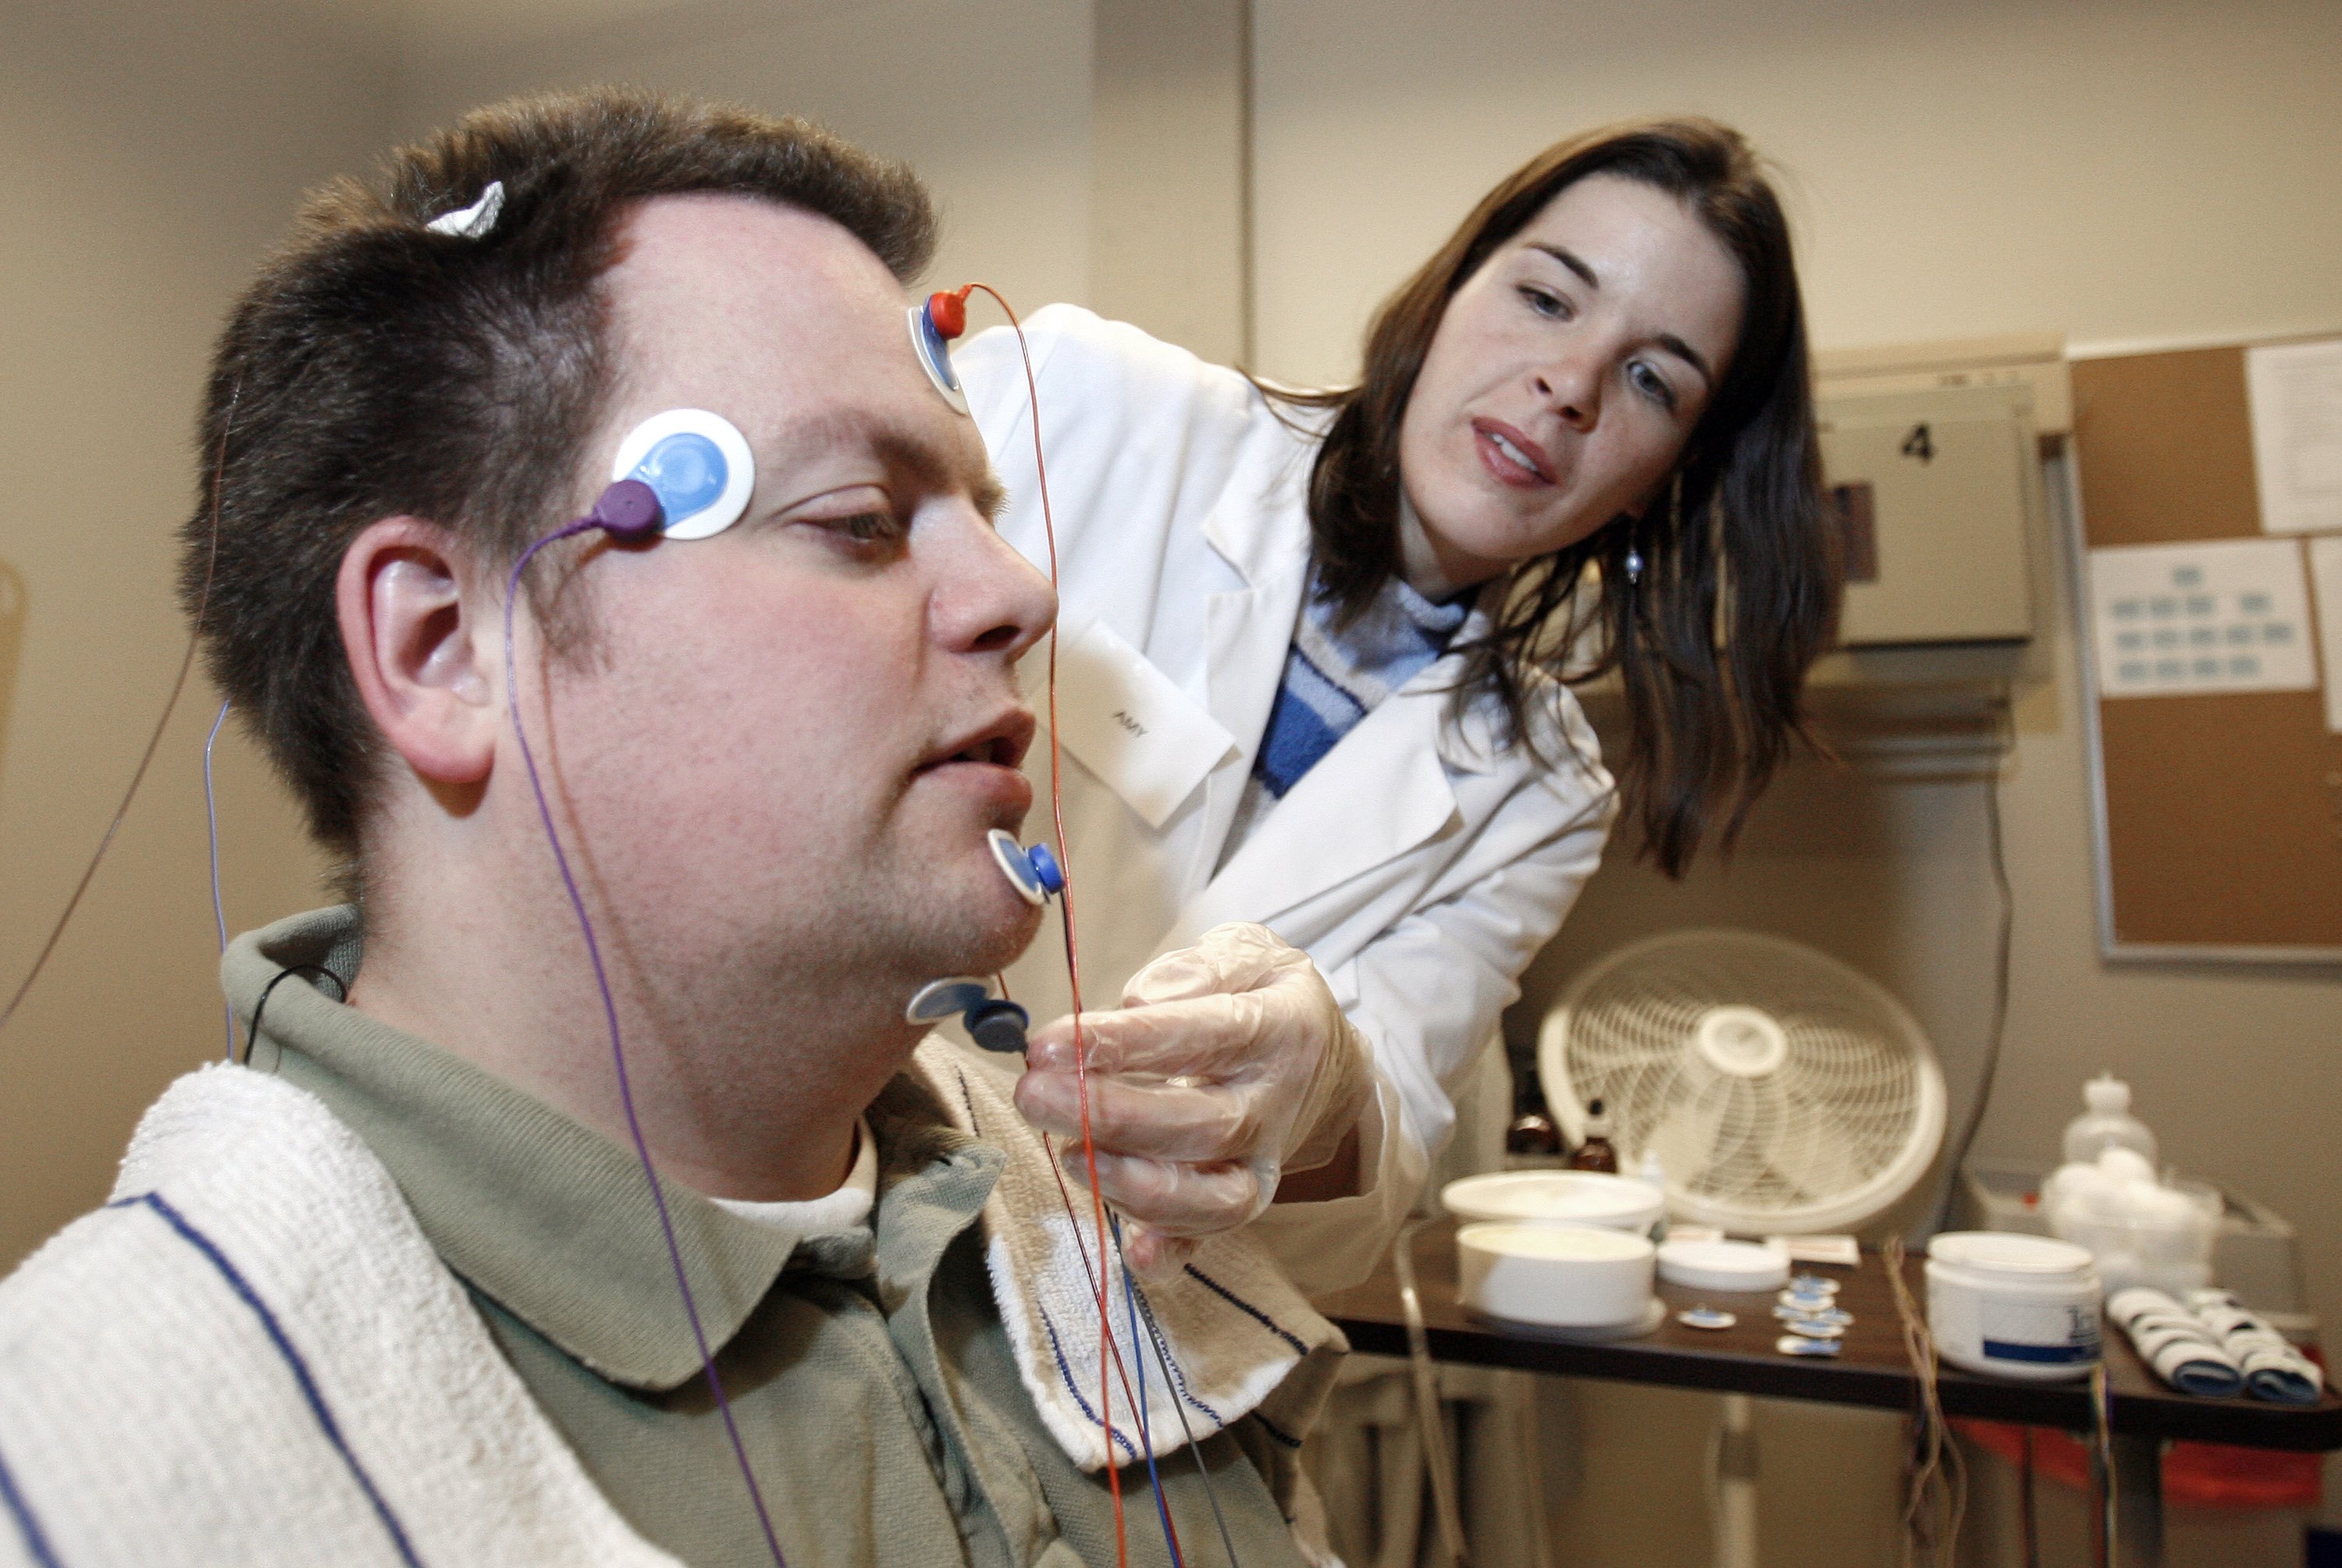 Ryan Gamble has wires applied to his head by lab technologist Amy Bender in preparation for a polysomnographic recording system demonstration at Washington State University Spokane's Sleep and Performance Research Center December 13, 2006 in Spokane, Washington. (Jeff T. Green—Getty Images)